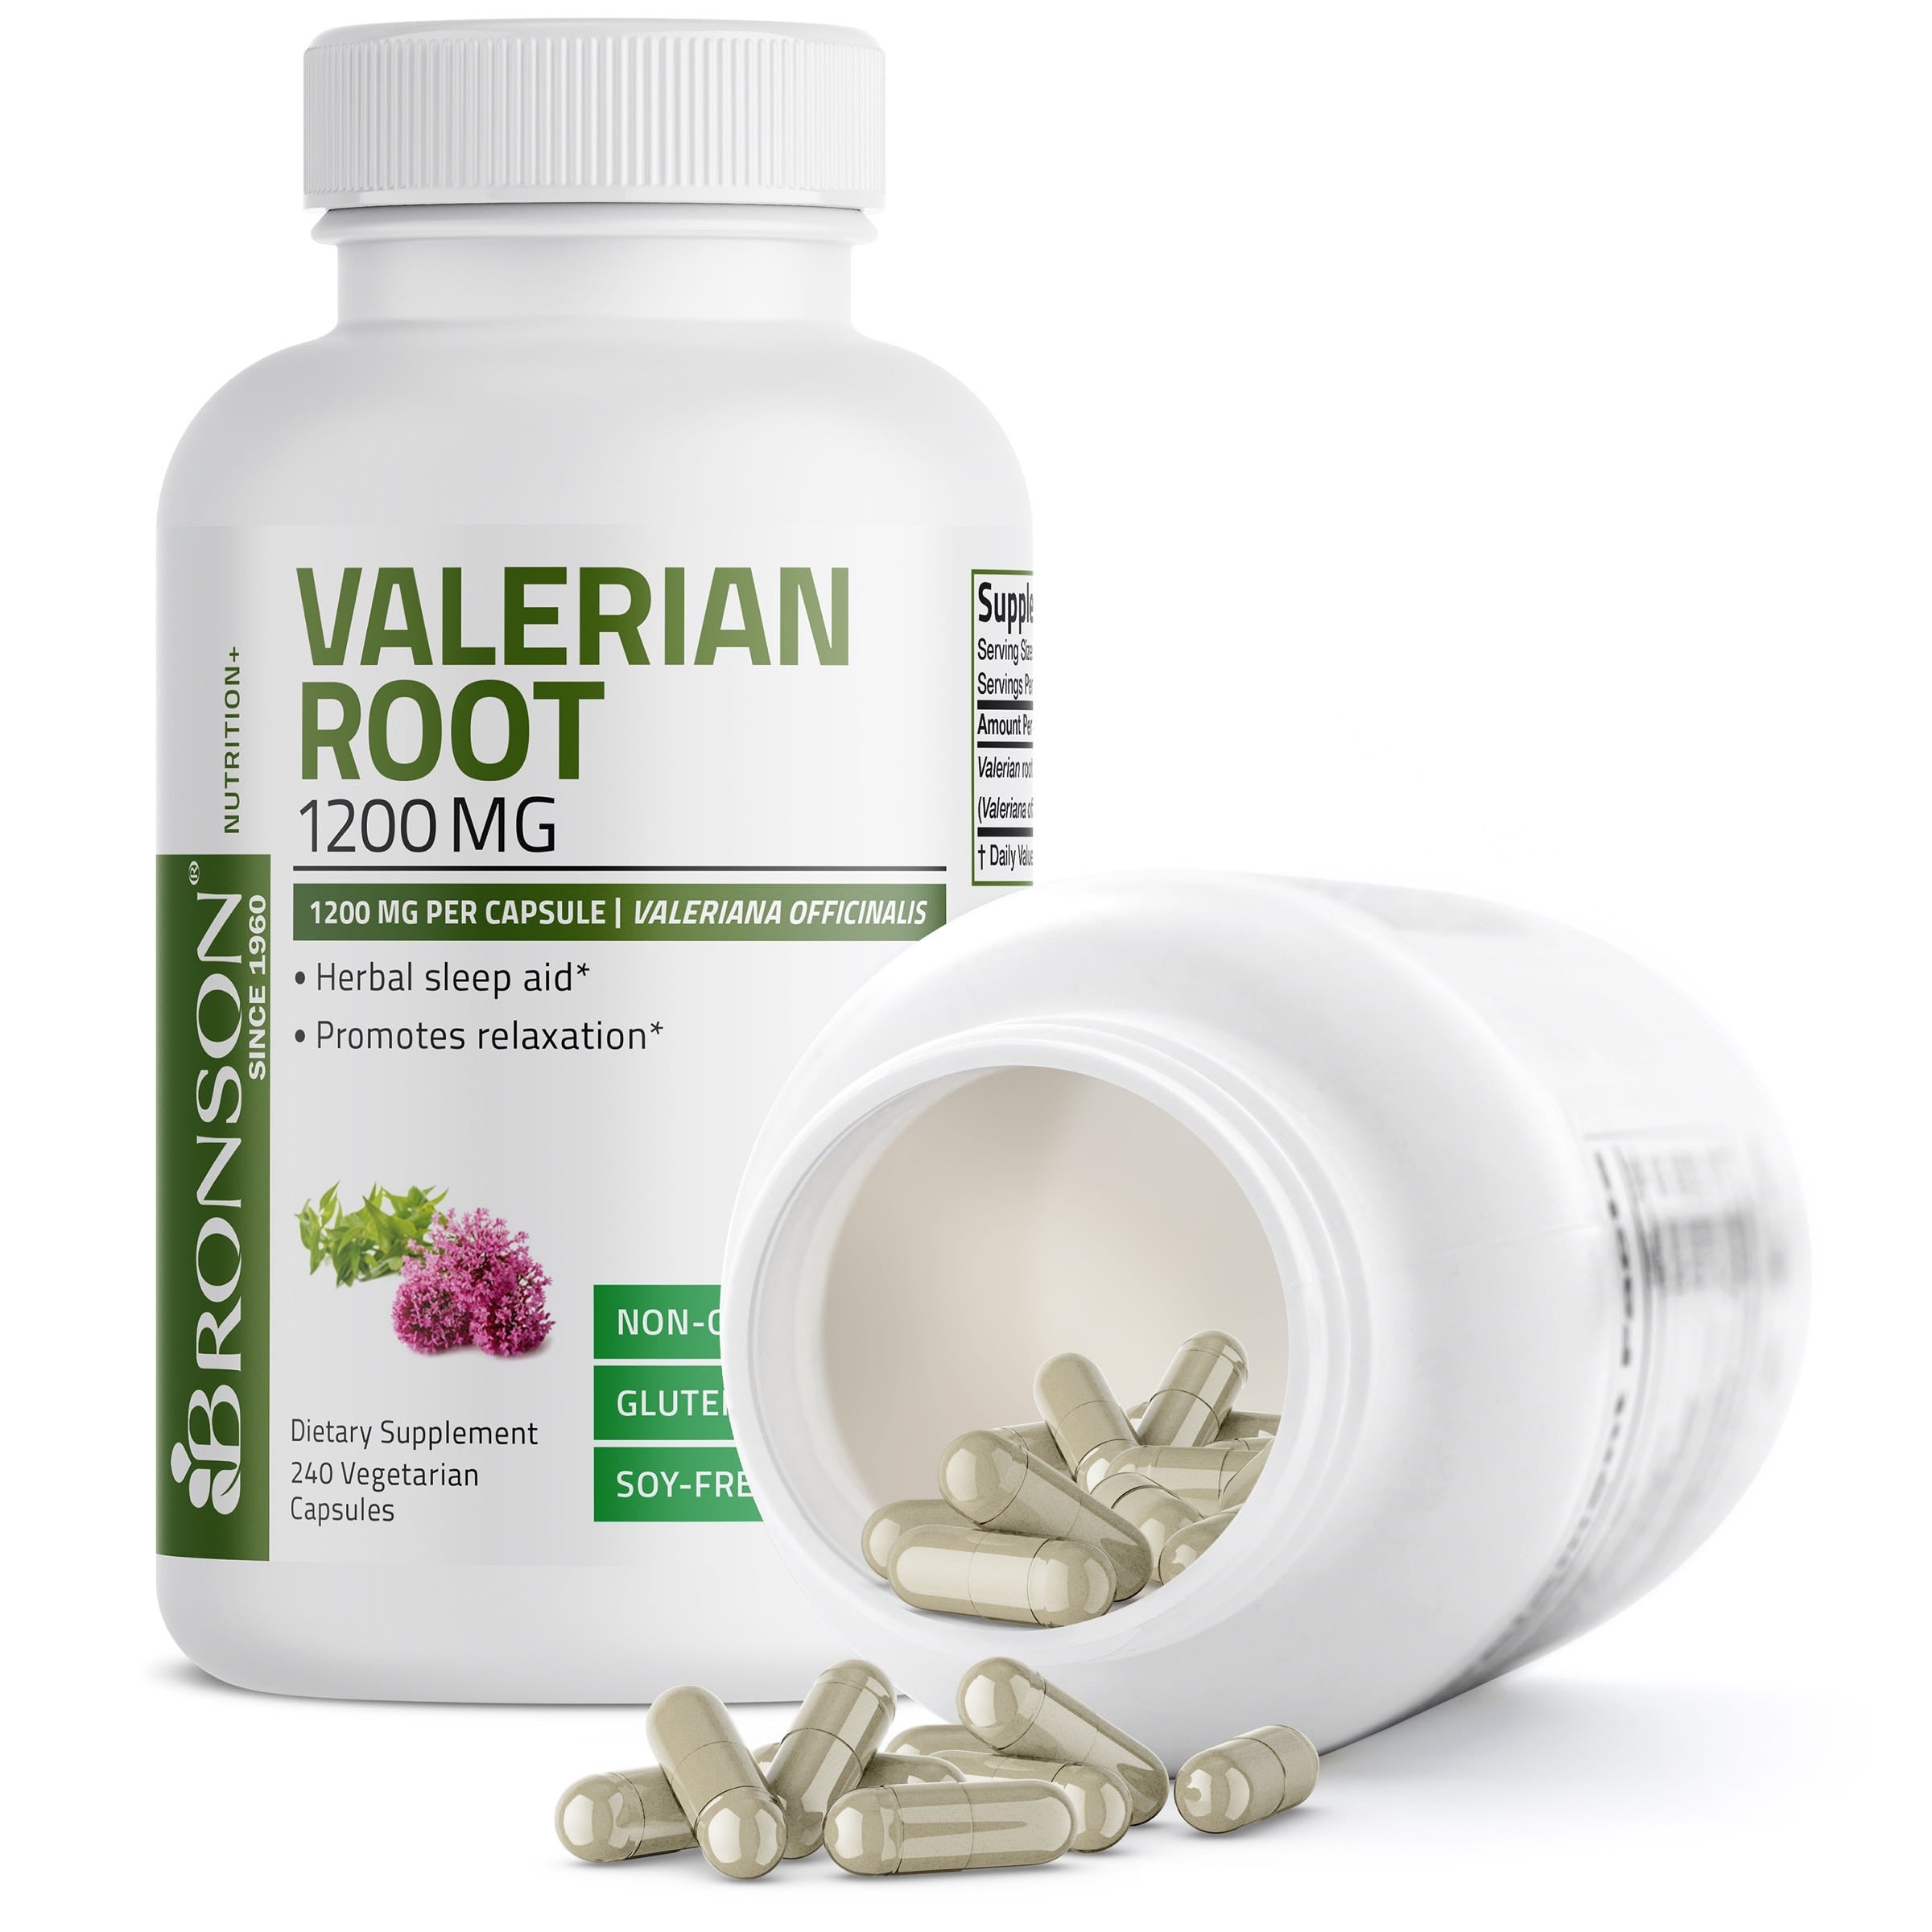 Valerian Root 1200 mg view 10 of 6